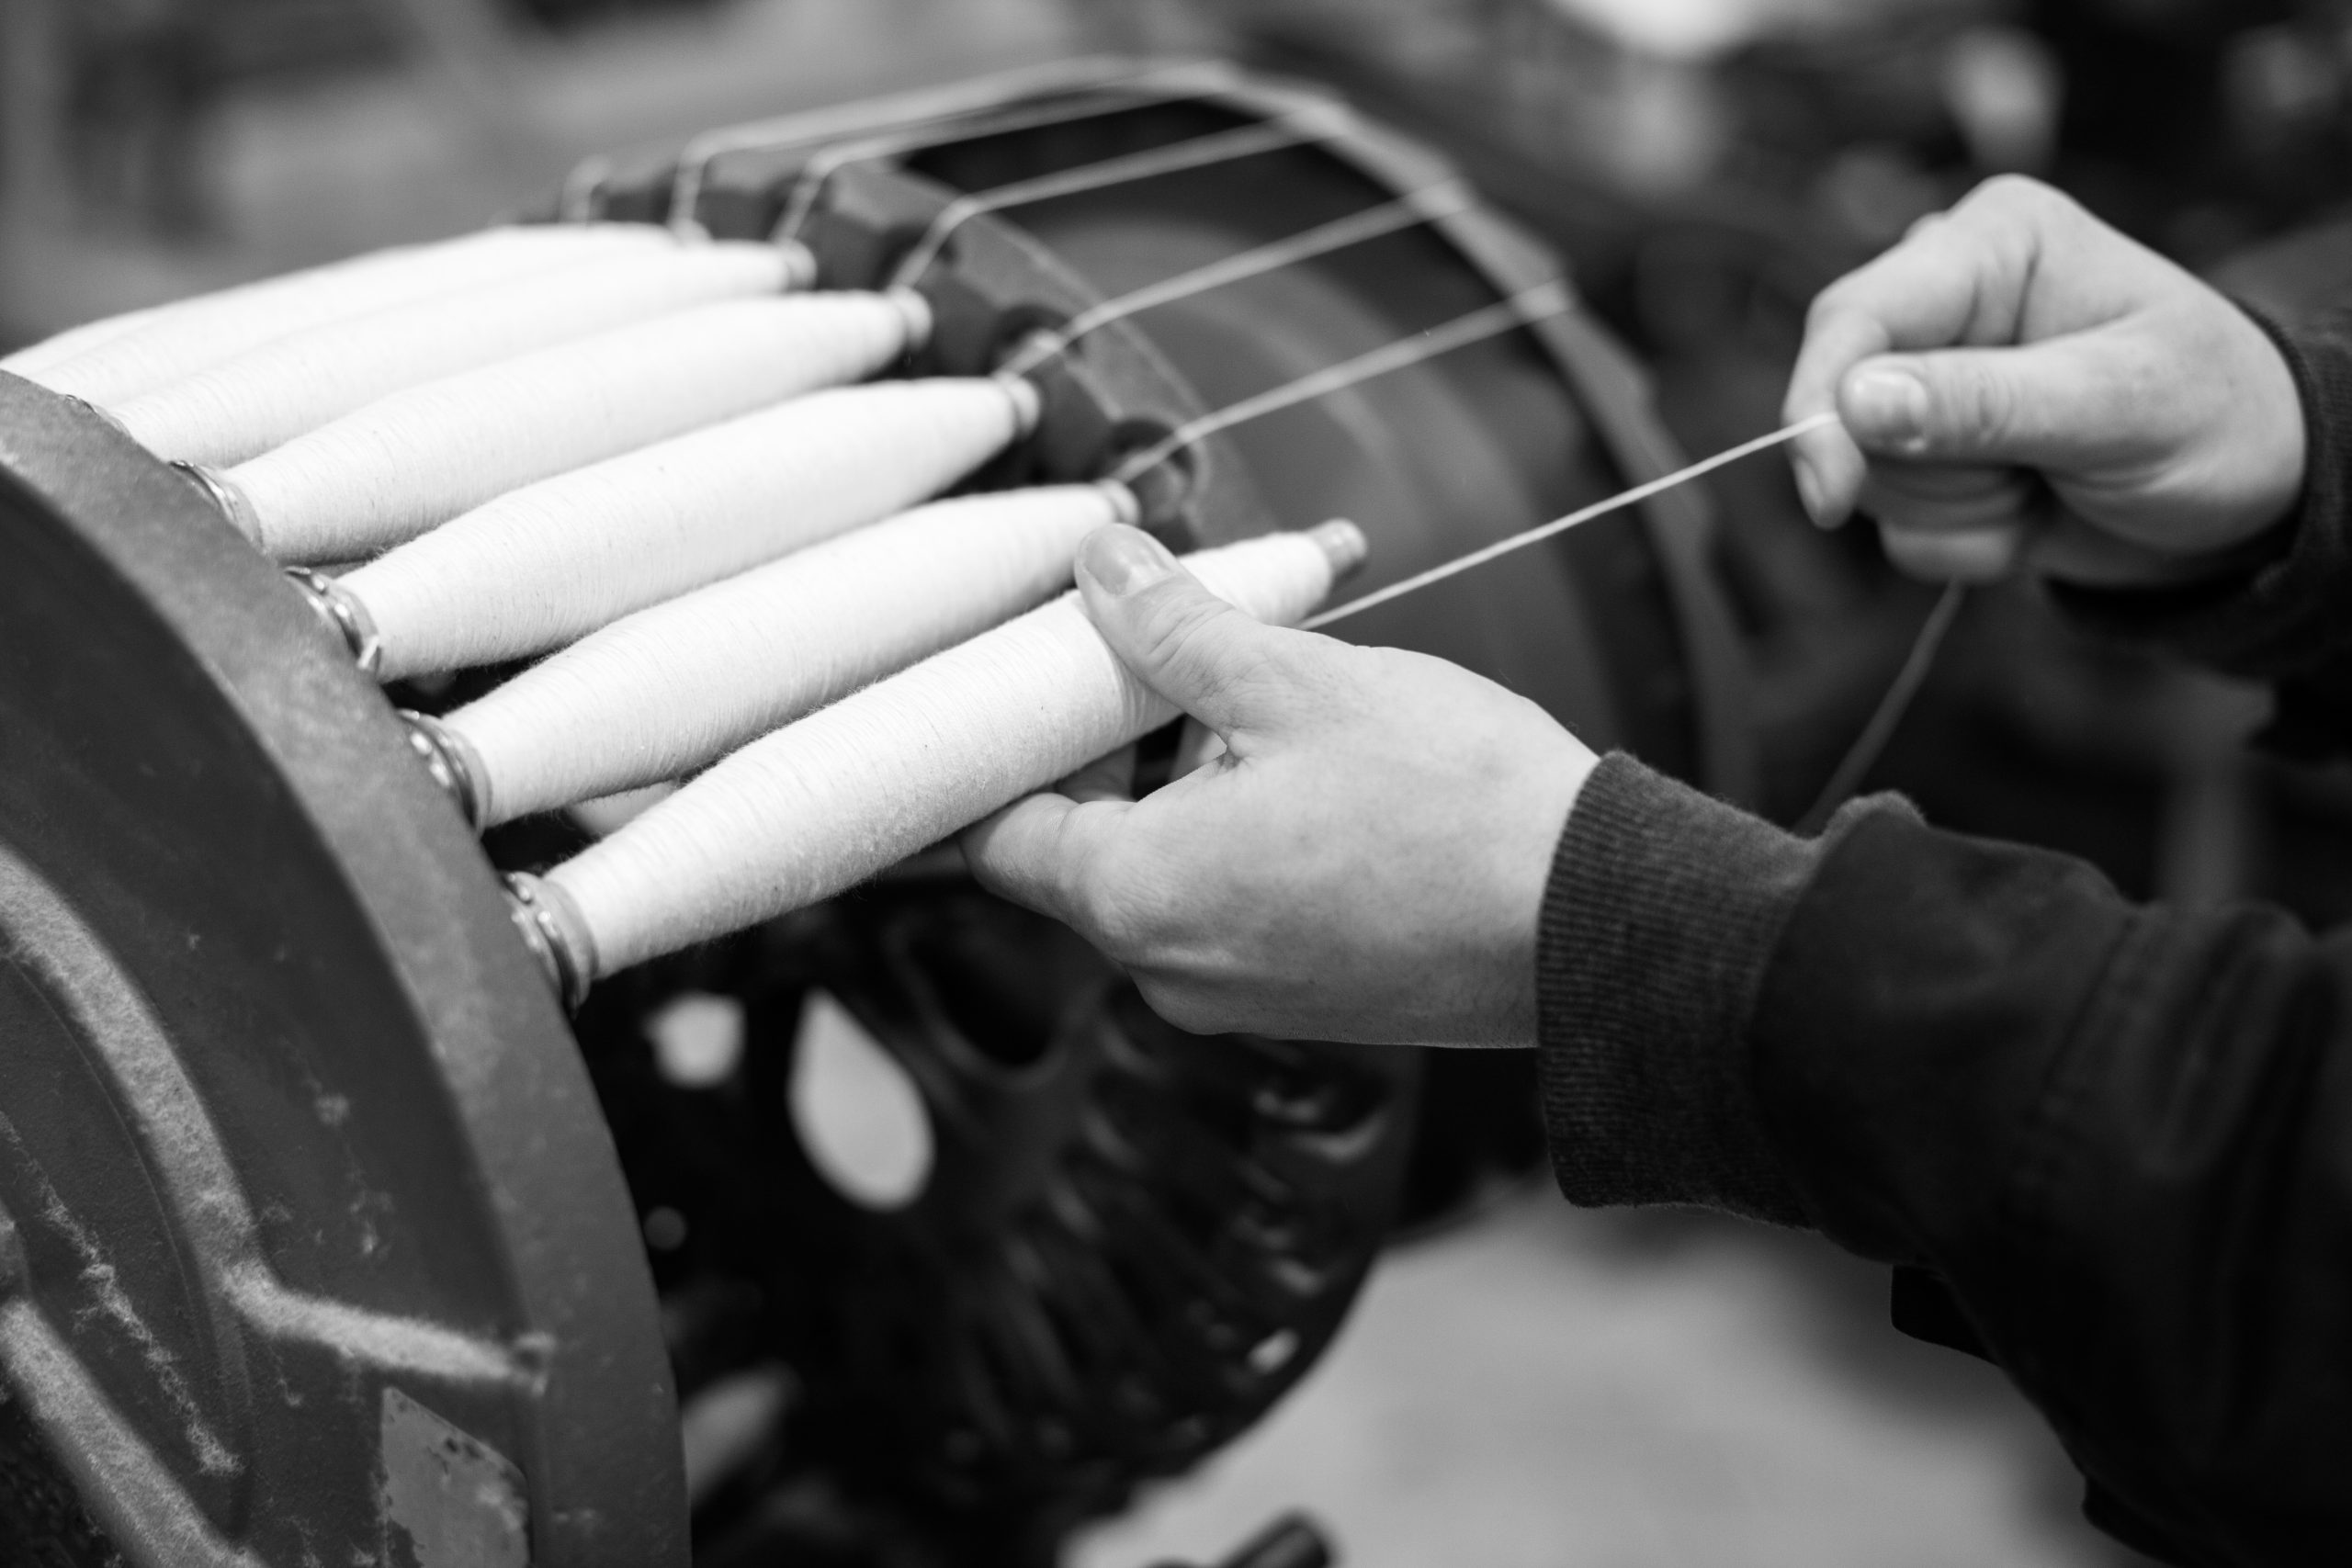 black-and-white-photo-craftsman-hands-working-with-shuttle-loom-bobbins-wound